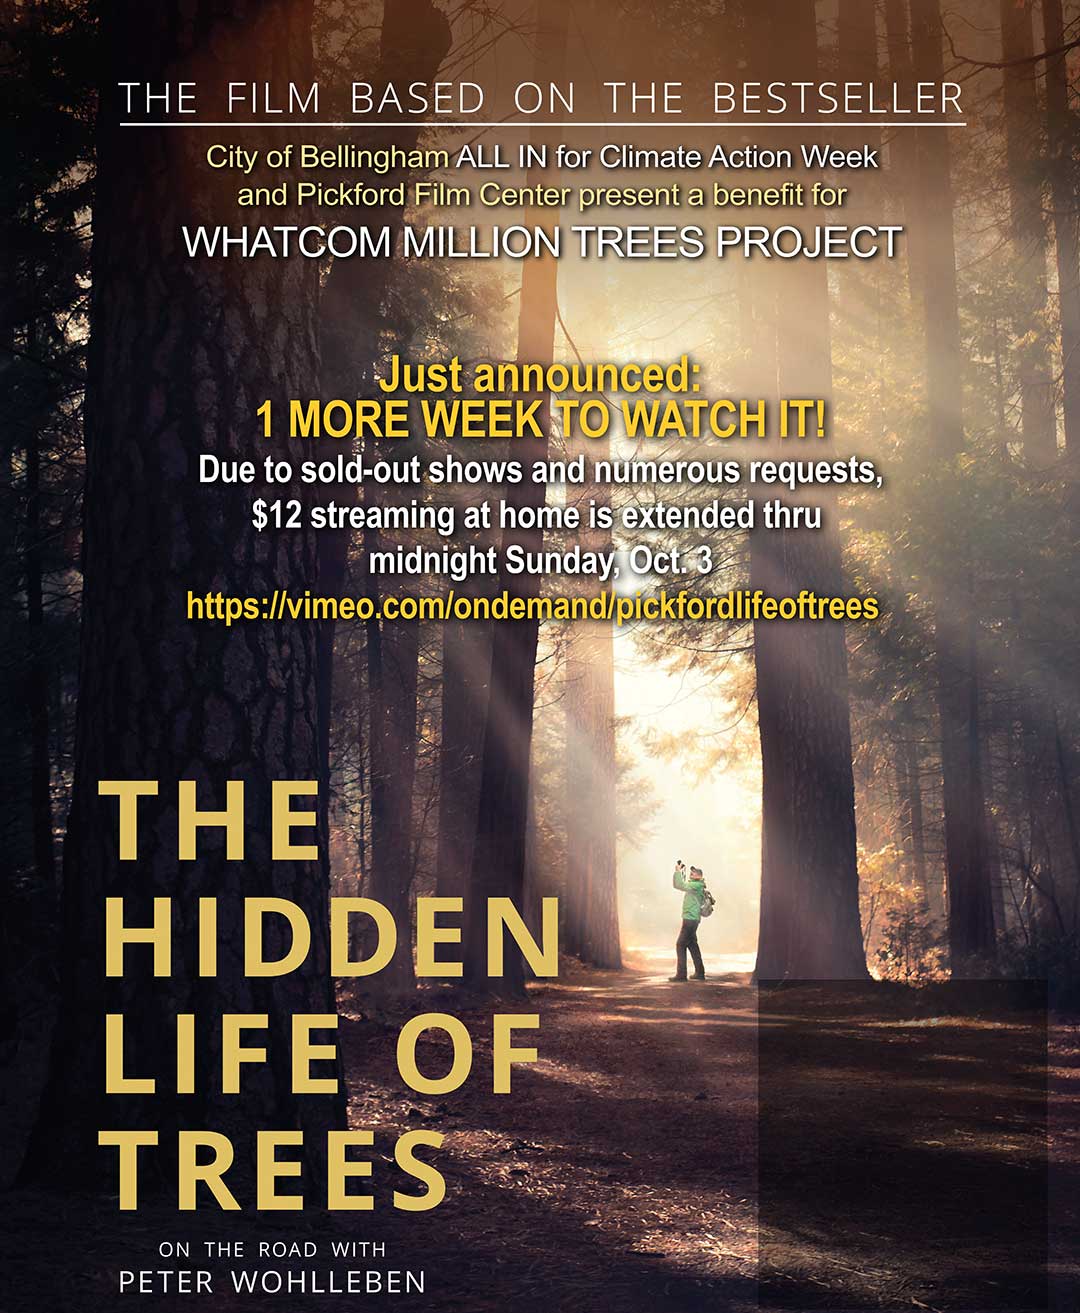 Film event poster for the Hidden Life of Trees showing a man standing in the forest with text overlay with information about the event, including an announcement that the On Demand virtual streaming has been extended through Oct. 3.